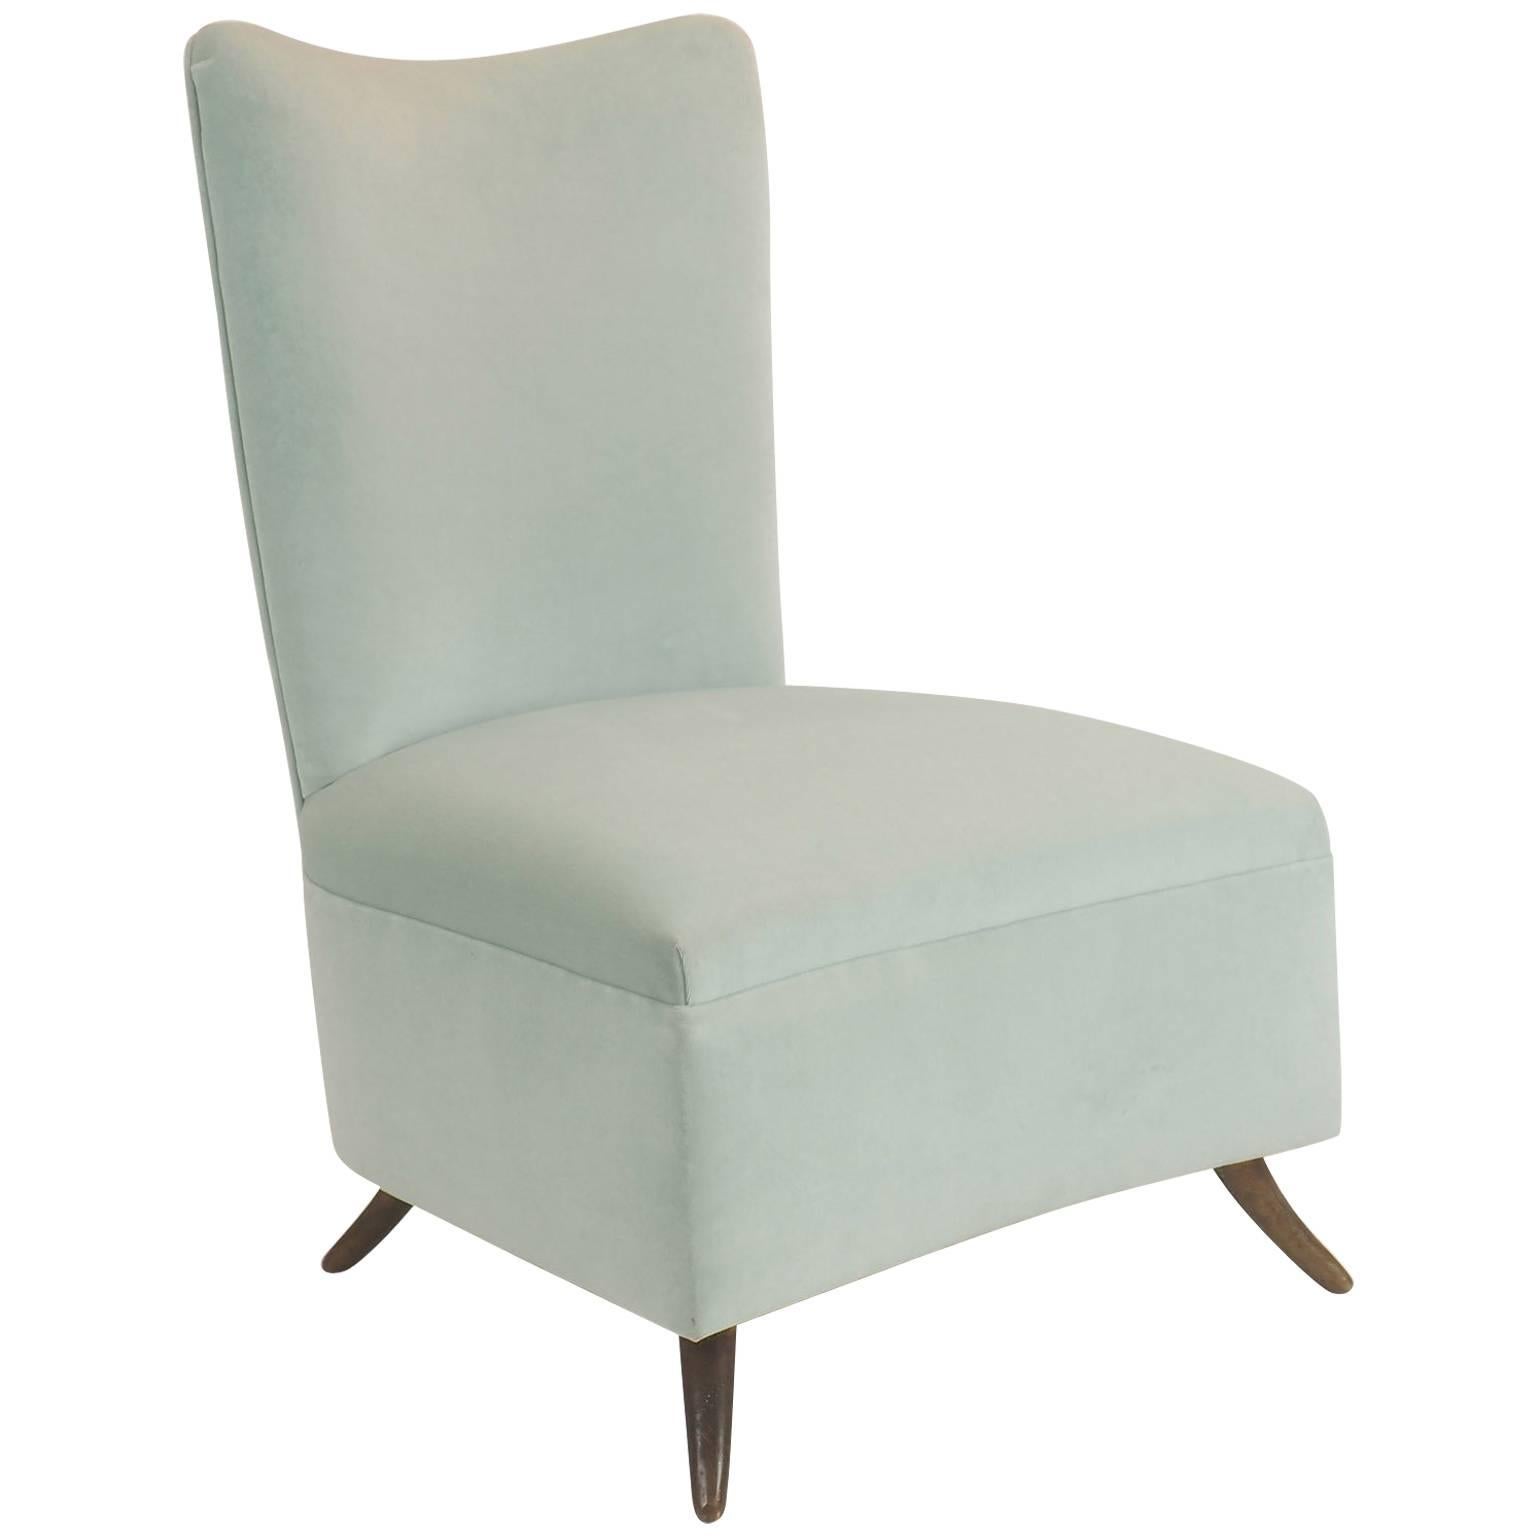 Charming and elegant rare armchair/ slipping chair manufactured by ISA and attributed to Gio Ponti design.
Velvet upholstery in elegant light Verde Acqua color, with rounded brass feet.
Reupholstered with Italian pure cotton velvet, soft and